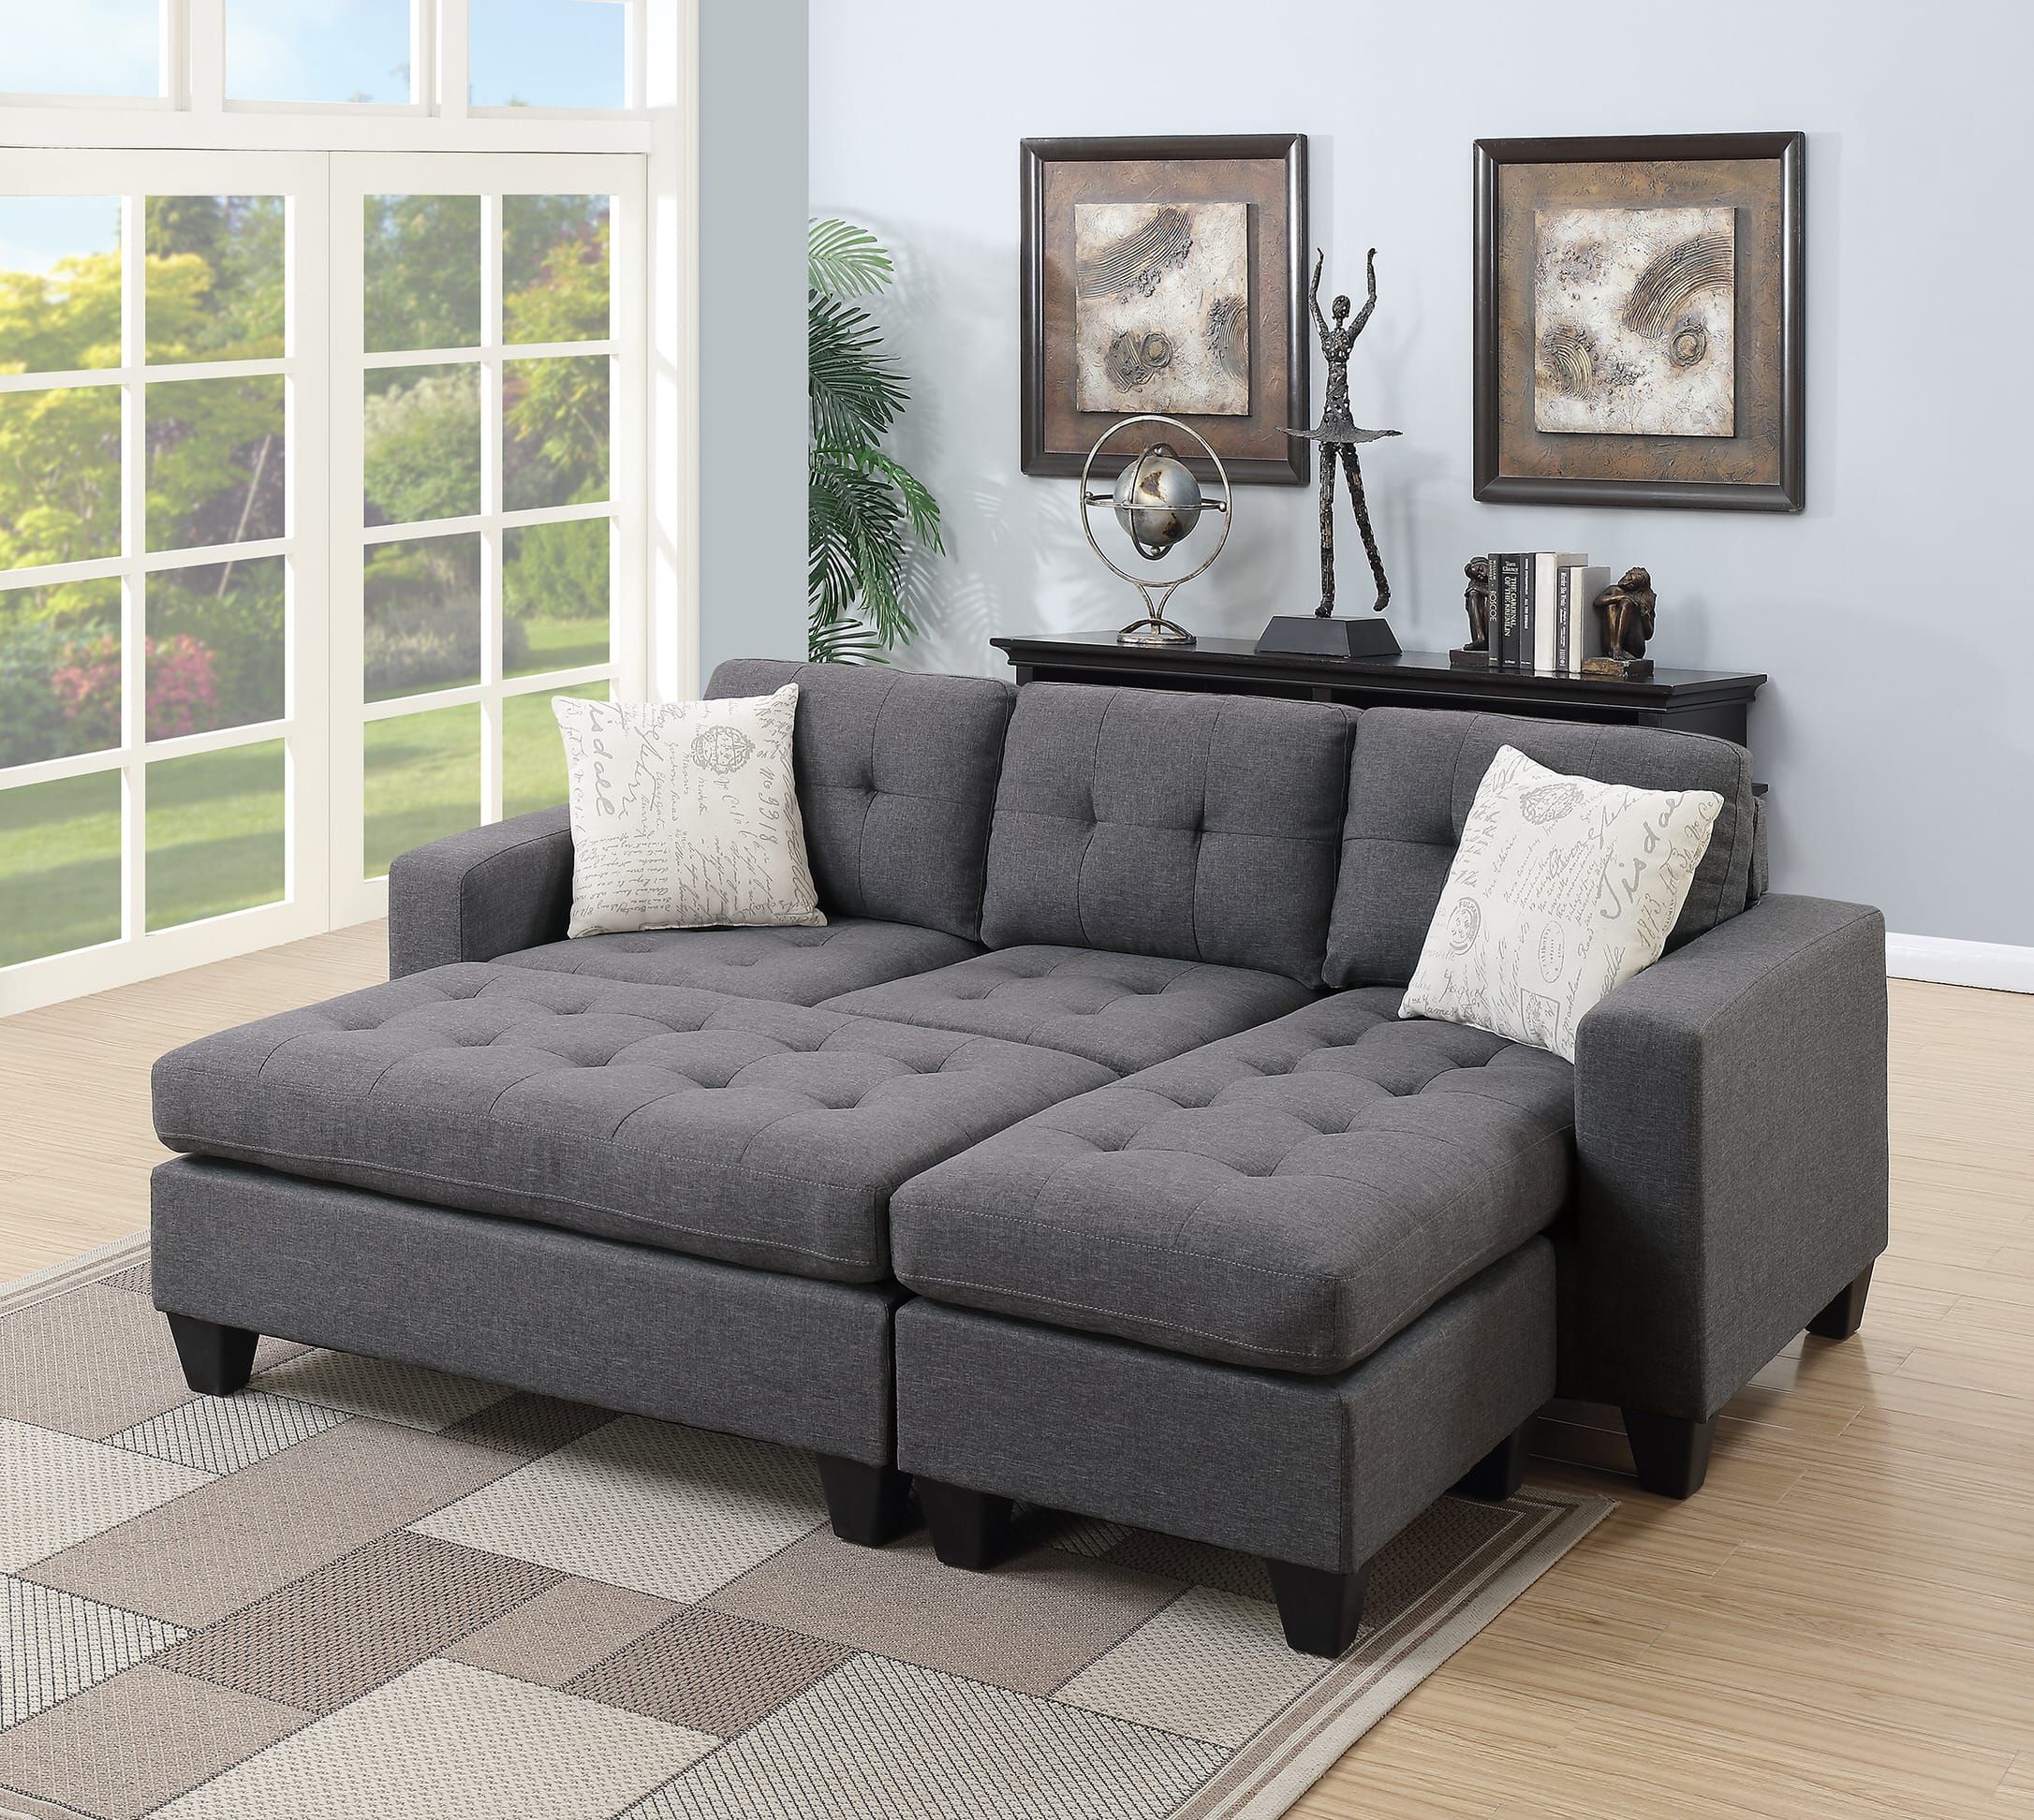 F6920 Blue Gray Sectional Sofa Setpoundex Intended For Molnar Upholstered Sectional Sofas Blue/Gray (View 4 of 15)